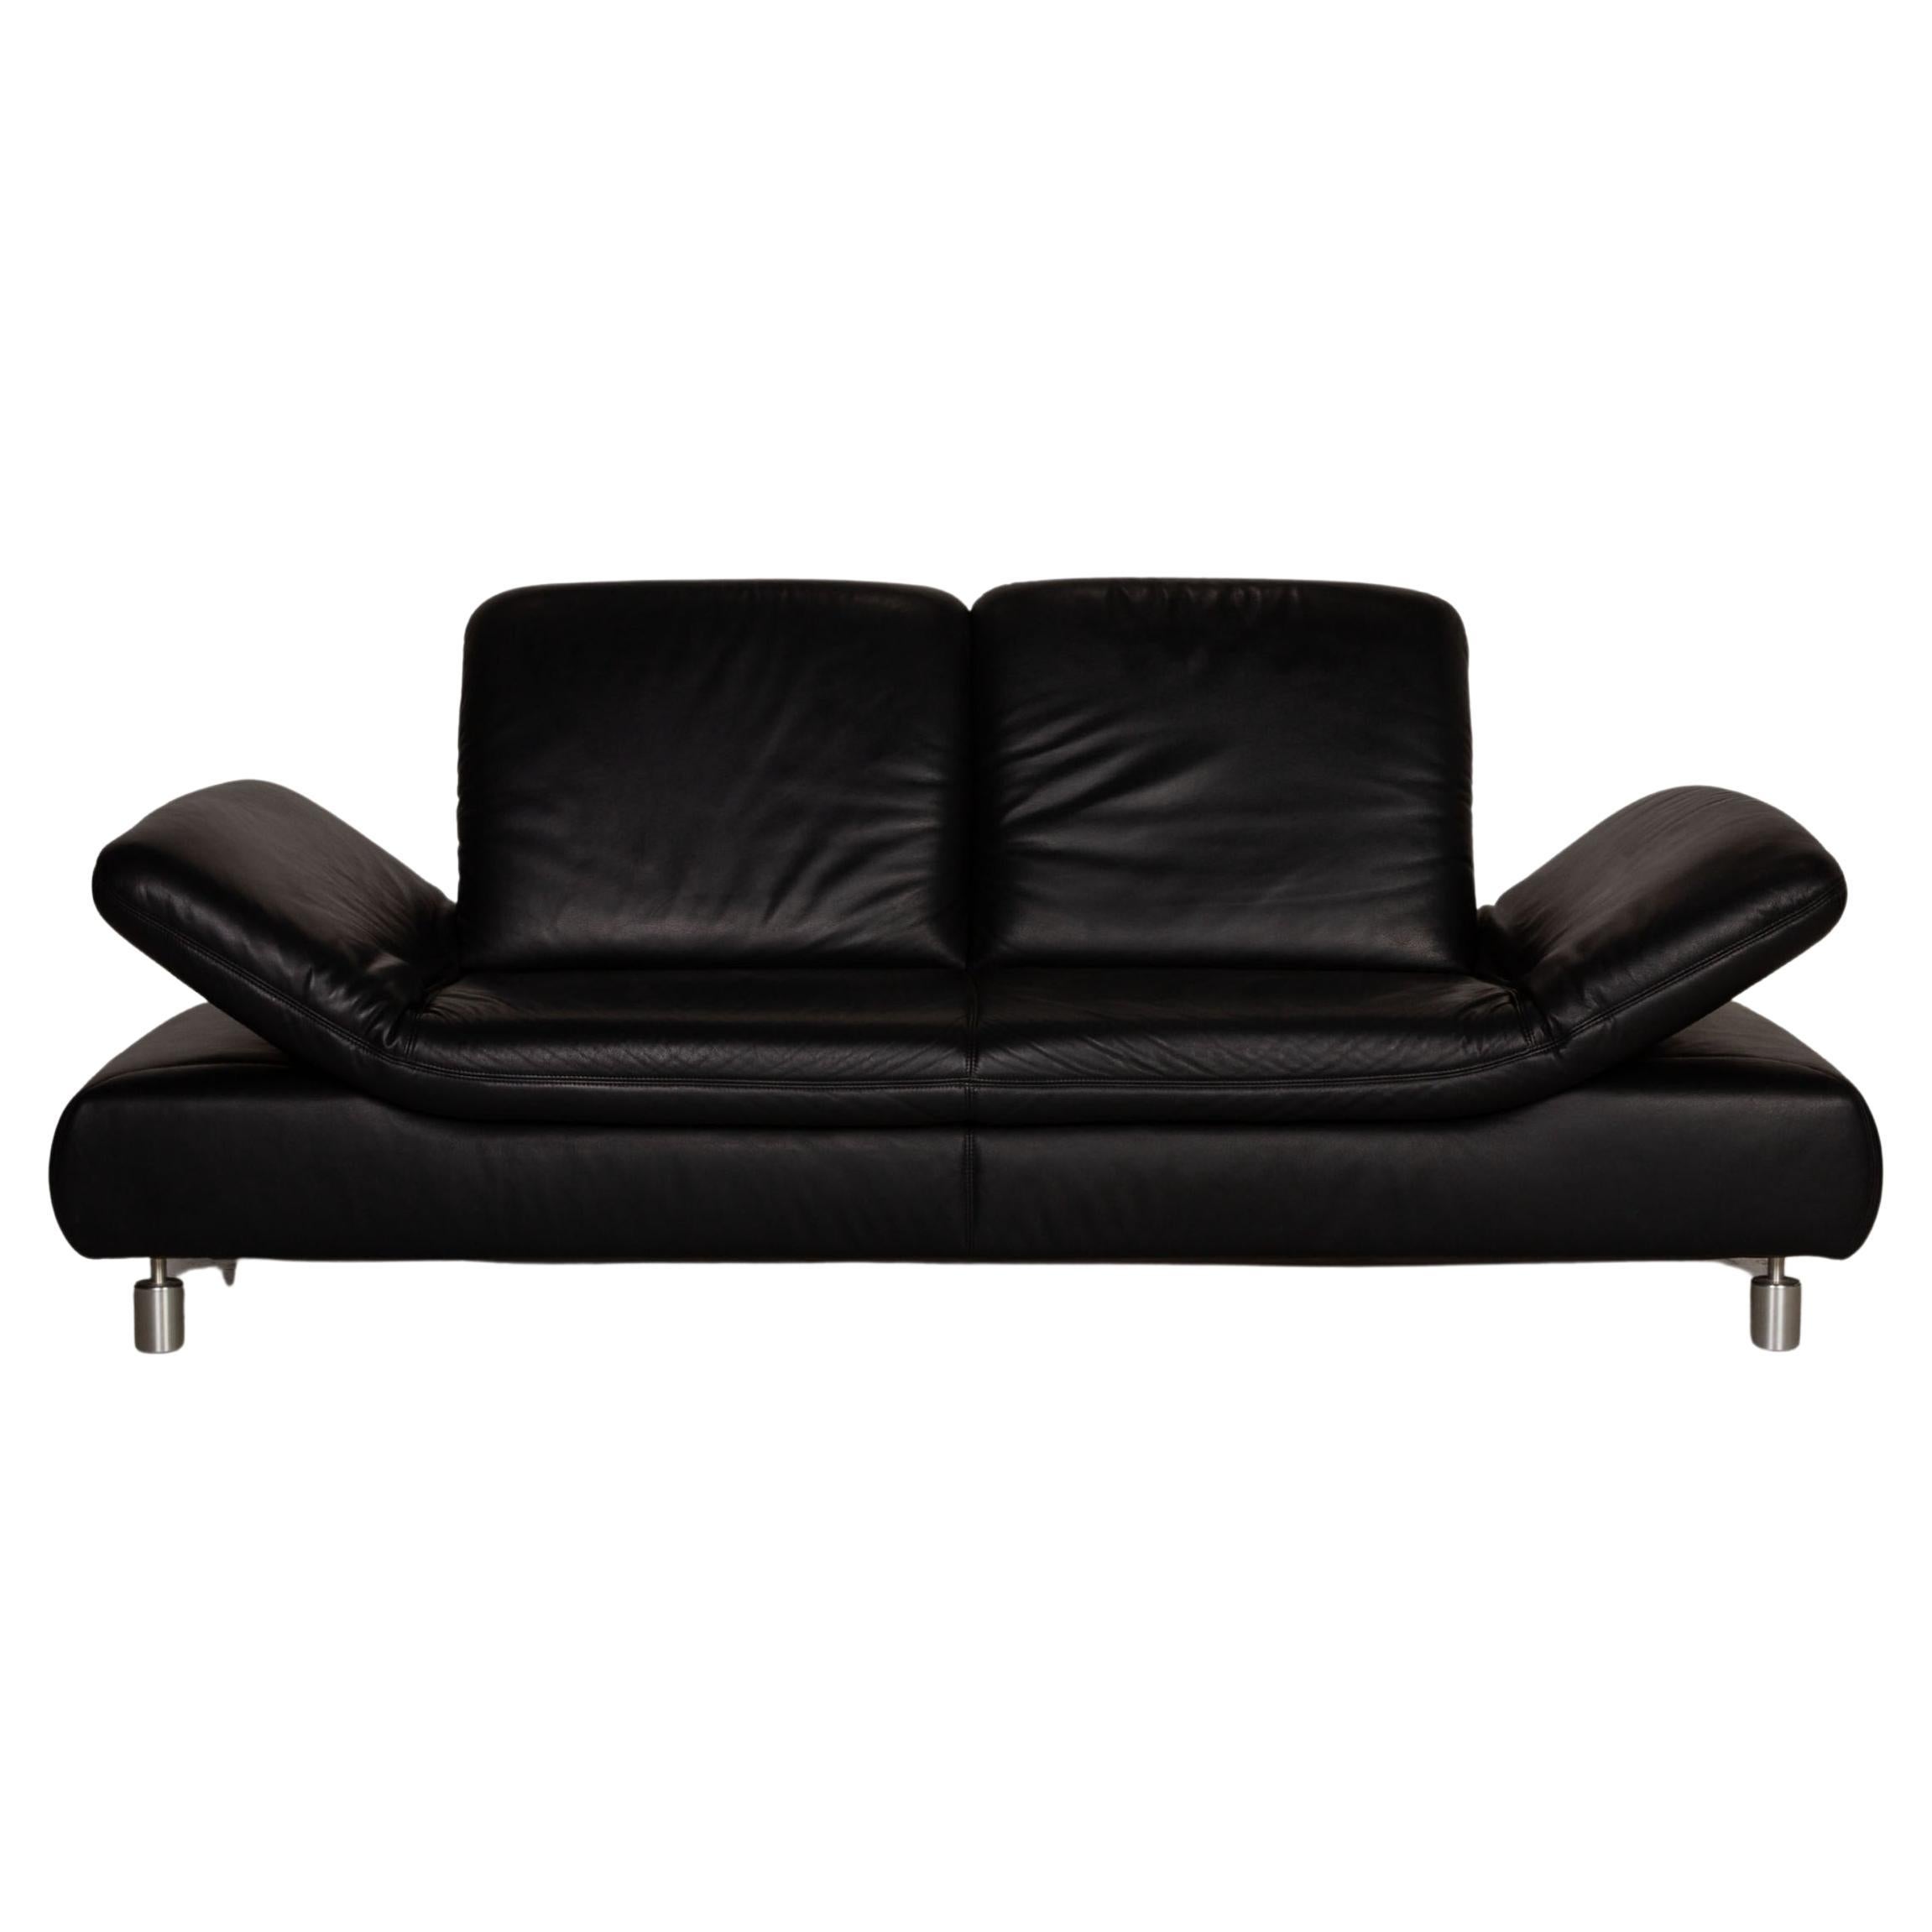 Koinor Rivoli Leather Sofa Black Two-Seater Couch Function